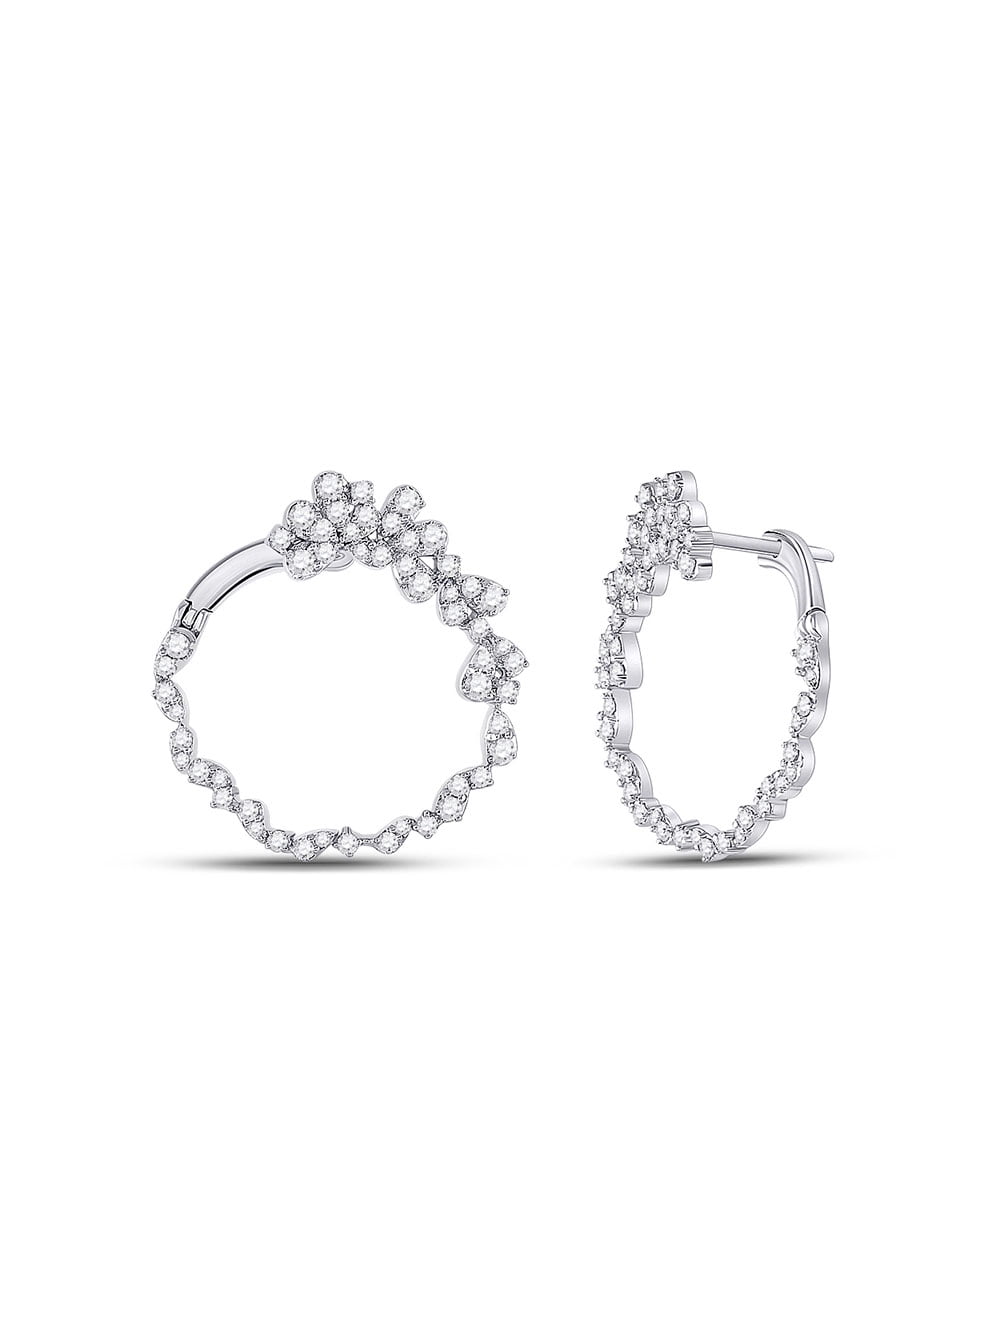 FB Jewels Solid 14K White Gold Polished and Diamond-cut Endless Hoop Earrings